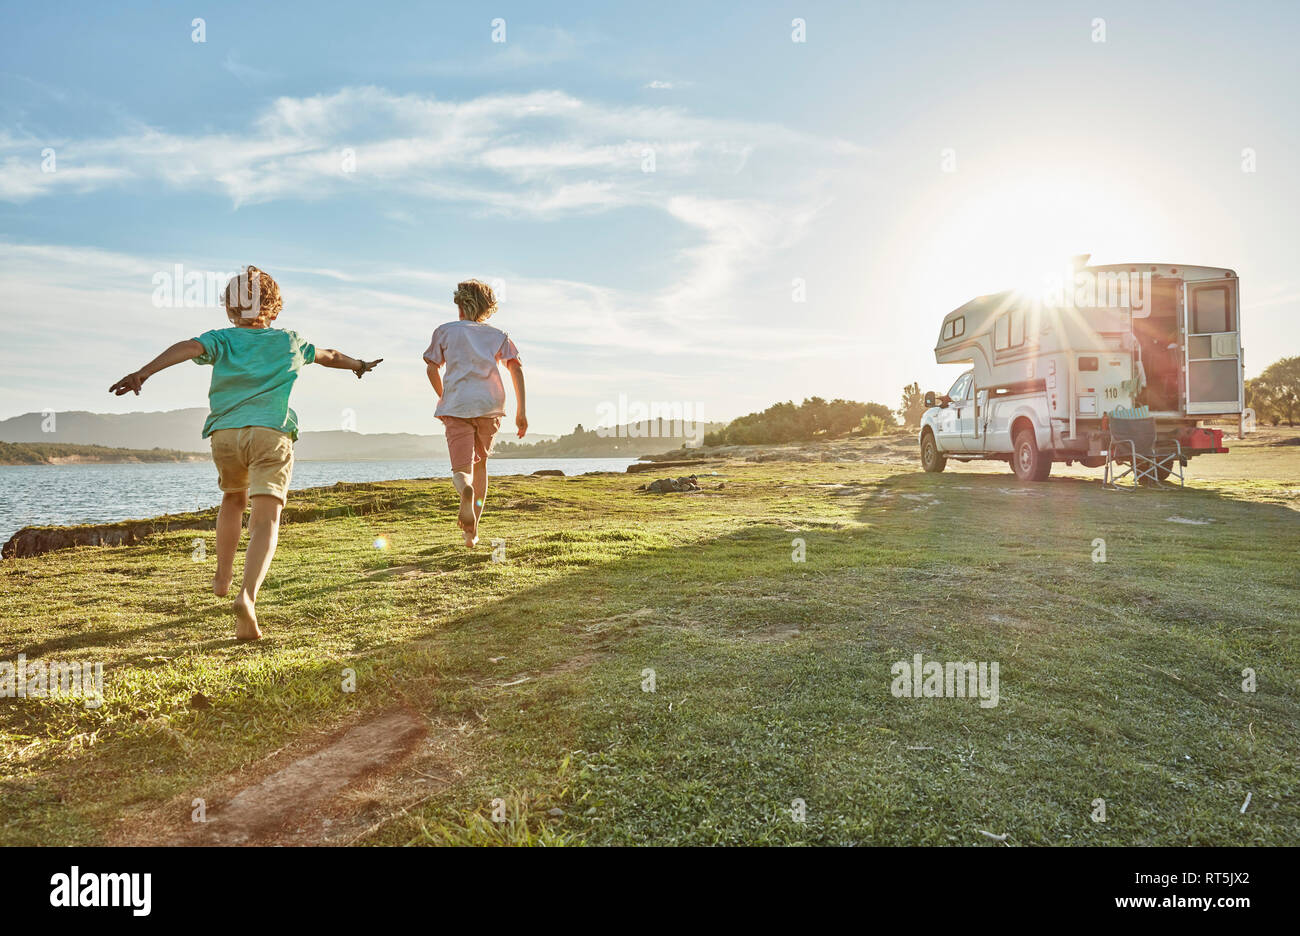 Chile, Talca, Rio Maule, two boys running on meadow beside camper at lake Stock Photo